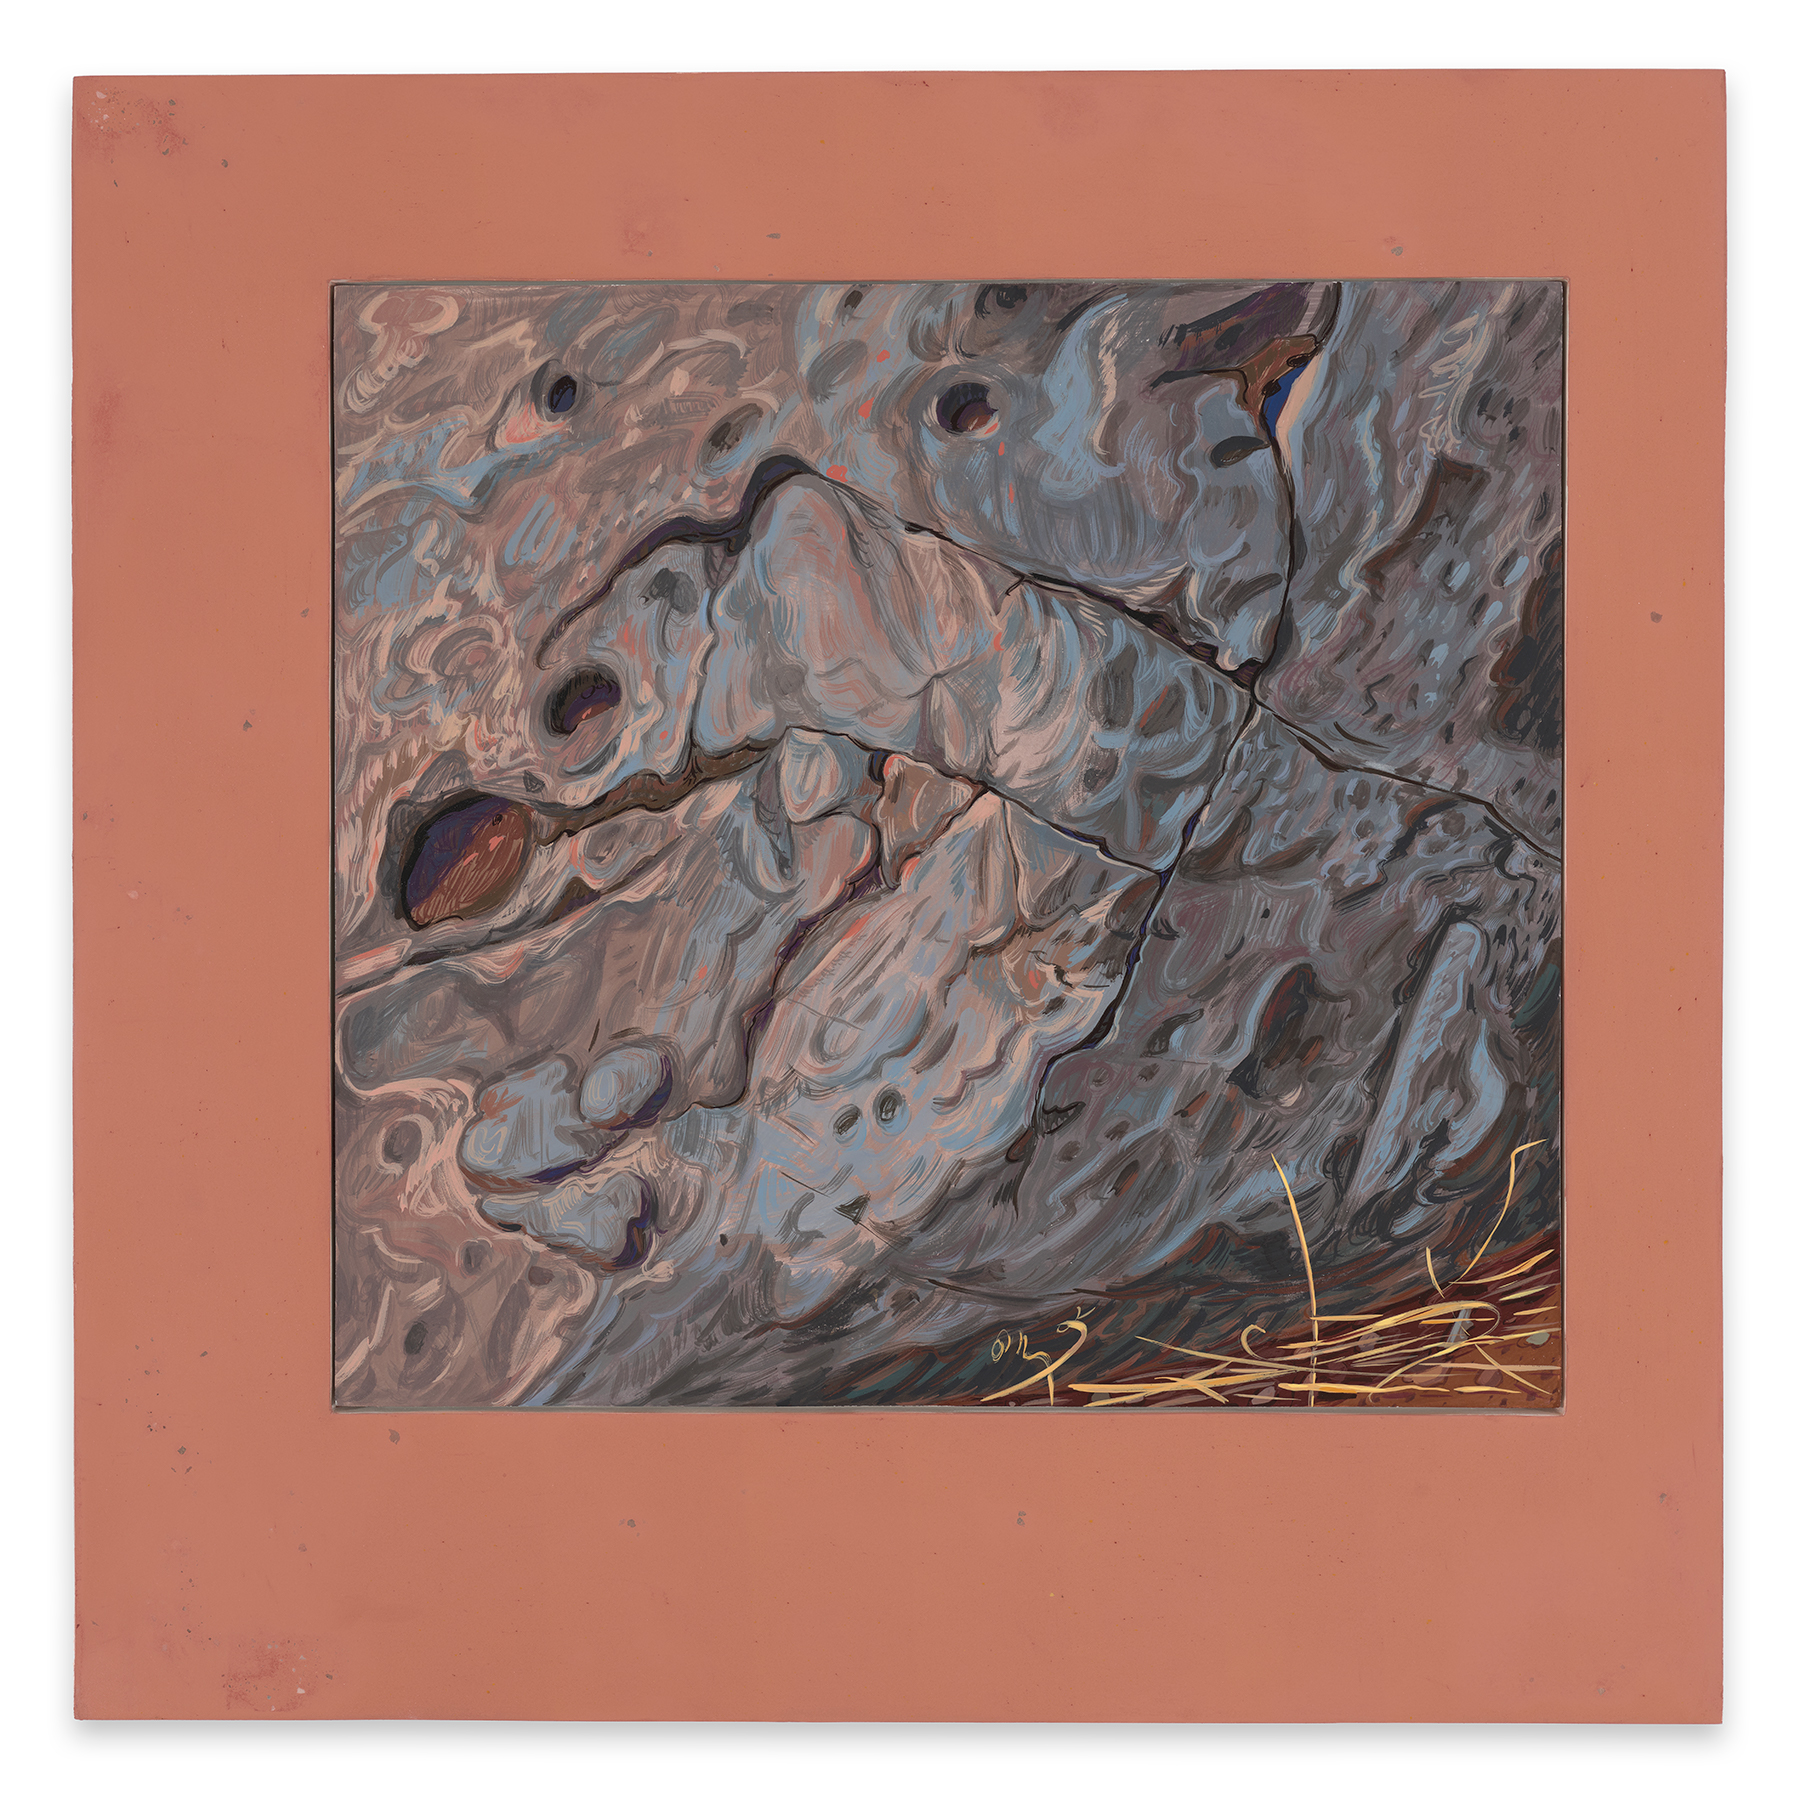 This image shows a painting which is framed in a pigmented pastel pinkish brown panel that includes fragments of earth and rocks from the sites where the paintings were made.  The composition basically becomes an abstraction of a section of a boulder with the sides of the rock flush with the picture frame.  The slight curvature of form at the bottom right corner of the painting creates the notion of a rock-face or boulder-like form along with the inclusion of a patch of dirt and some wheat colored grasses.  The surface of the boulder is painted in short energetic, curved, squiggly and linear brushstrokes of browns, reds, pinks, yellows, blues, grays, white, creams and purples to accentuate the curvature or angularity of the rock itself with its holes and mottled textures. In the center-right of the composition the surface of the rock is split in two directions - where a section is cleaved in the shape of a horizontal rectangle. Without the curvature of the rock in the lower right-hand corner, the painting would resemble a view looking down at a section of a river flow.